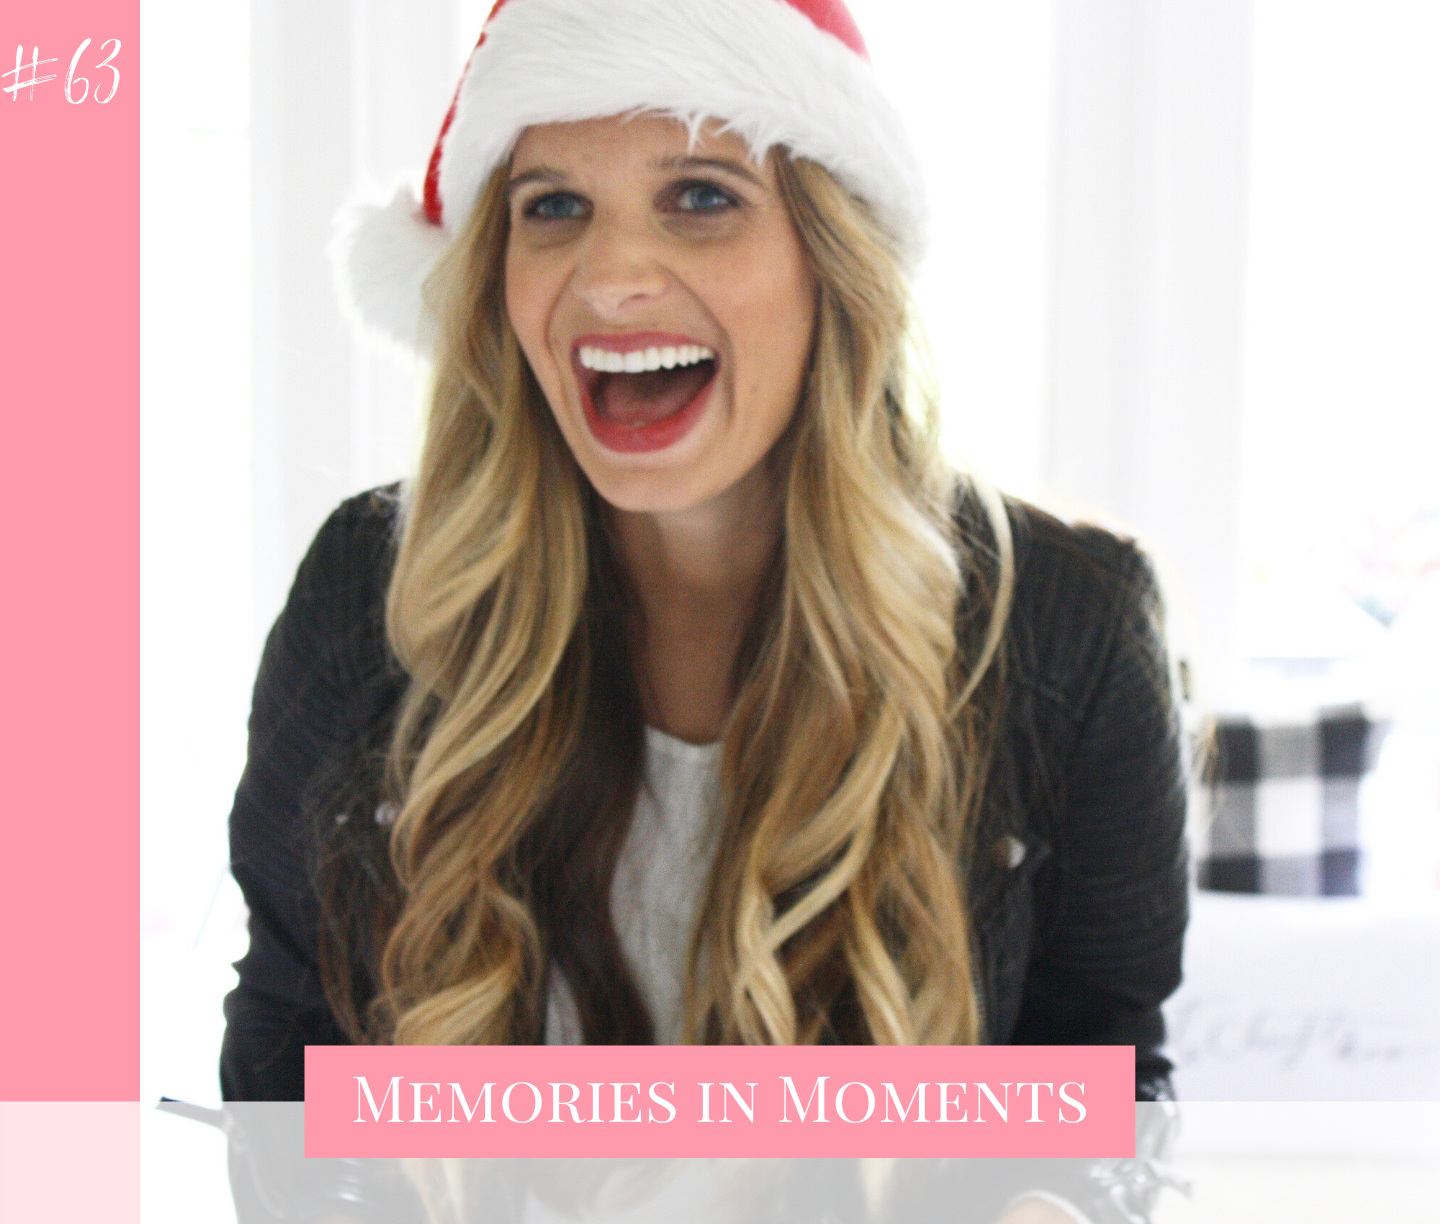 Holidays stressing you out? Beat the stress this year and get everything done by Demember one! Mom blogger, Ashley Carbonatto, is here with her top tips.